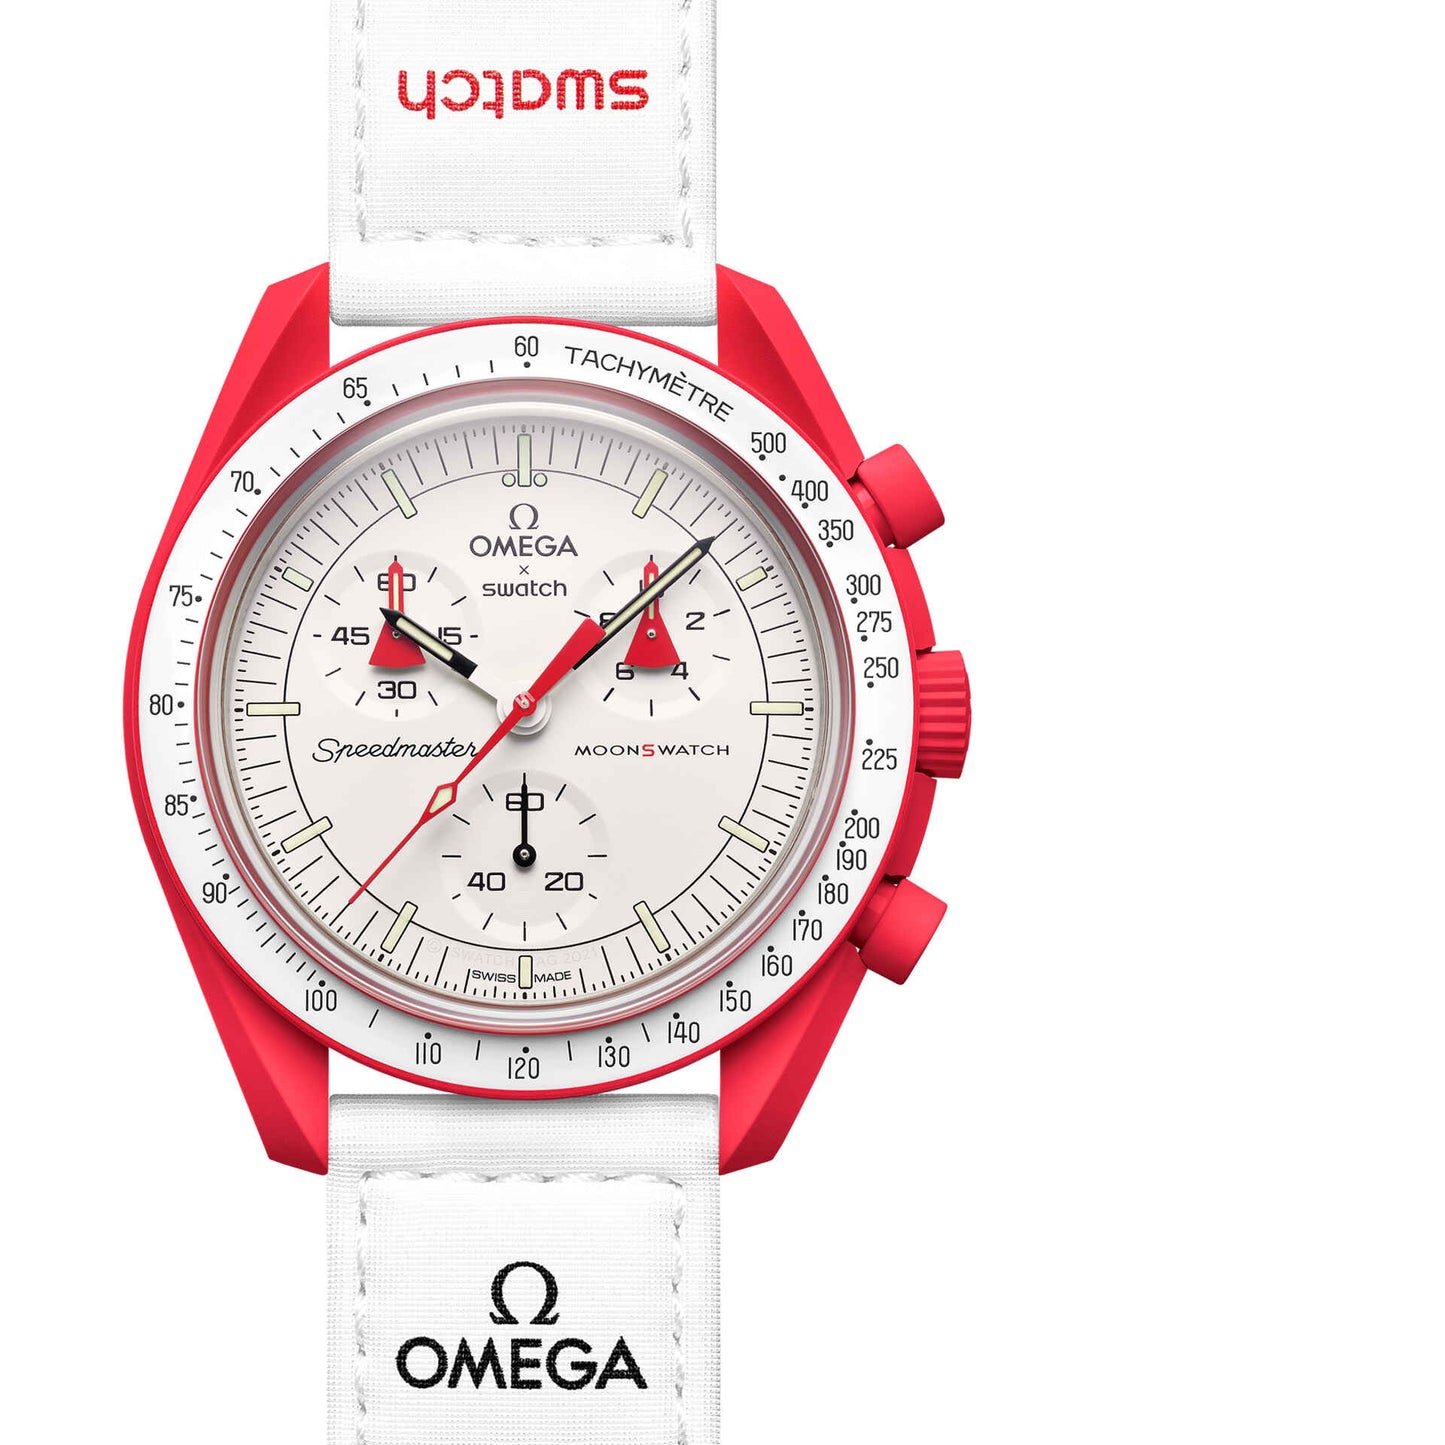 Omega Premium Quality extremely rare, and highly attractive prototype stainless steel With White Spacesuit-ready Velcro Strap Red Color Case Chronograph Moon Wristwatch- MISSION TO MARS OG-R-1060